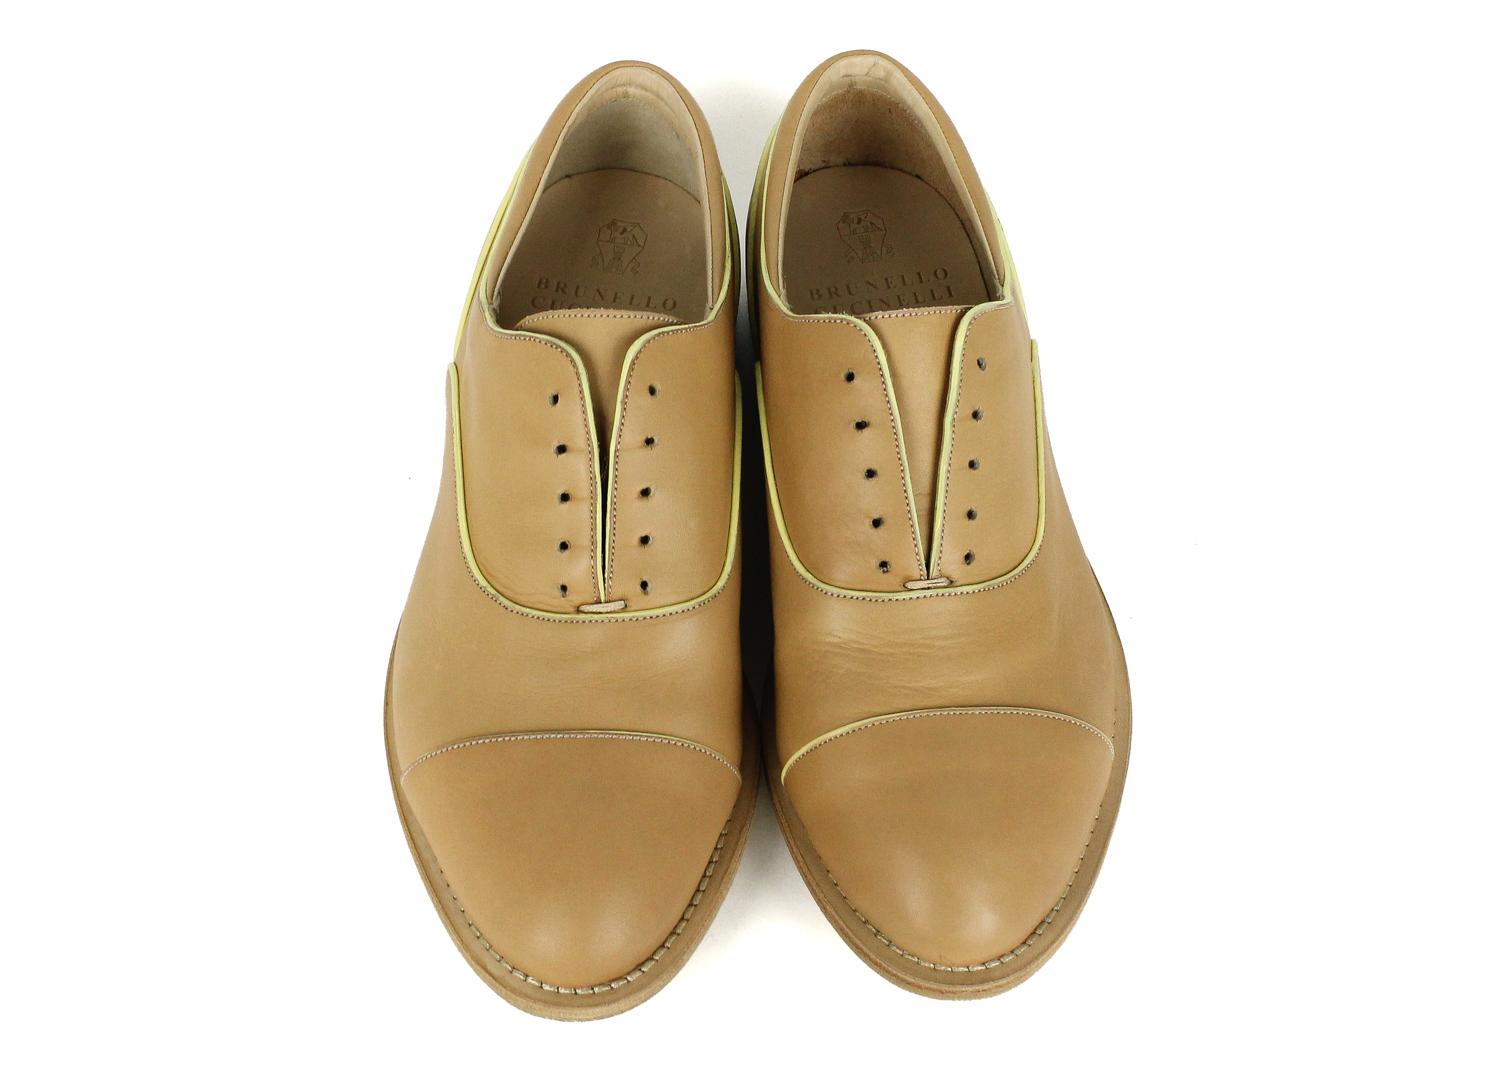 Brunello Cucinelli womens light brown leather loafers. These loafers feature lace free style with a pale yellow accented color along this classic silhouette. Pair with blue denim and white blouse for a chic everyday look.



Leather
Lace Free